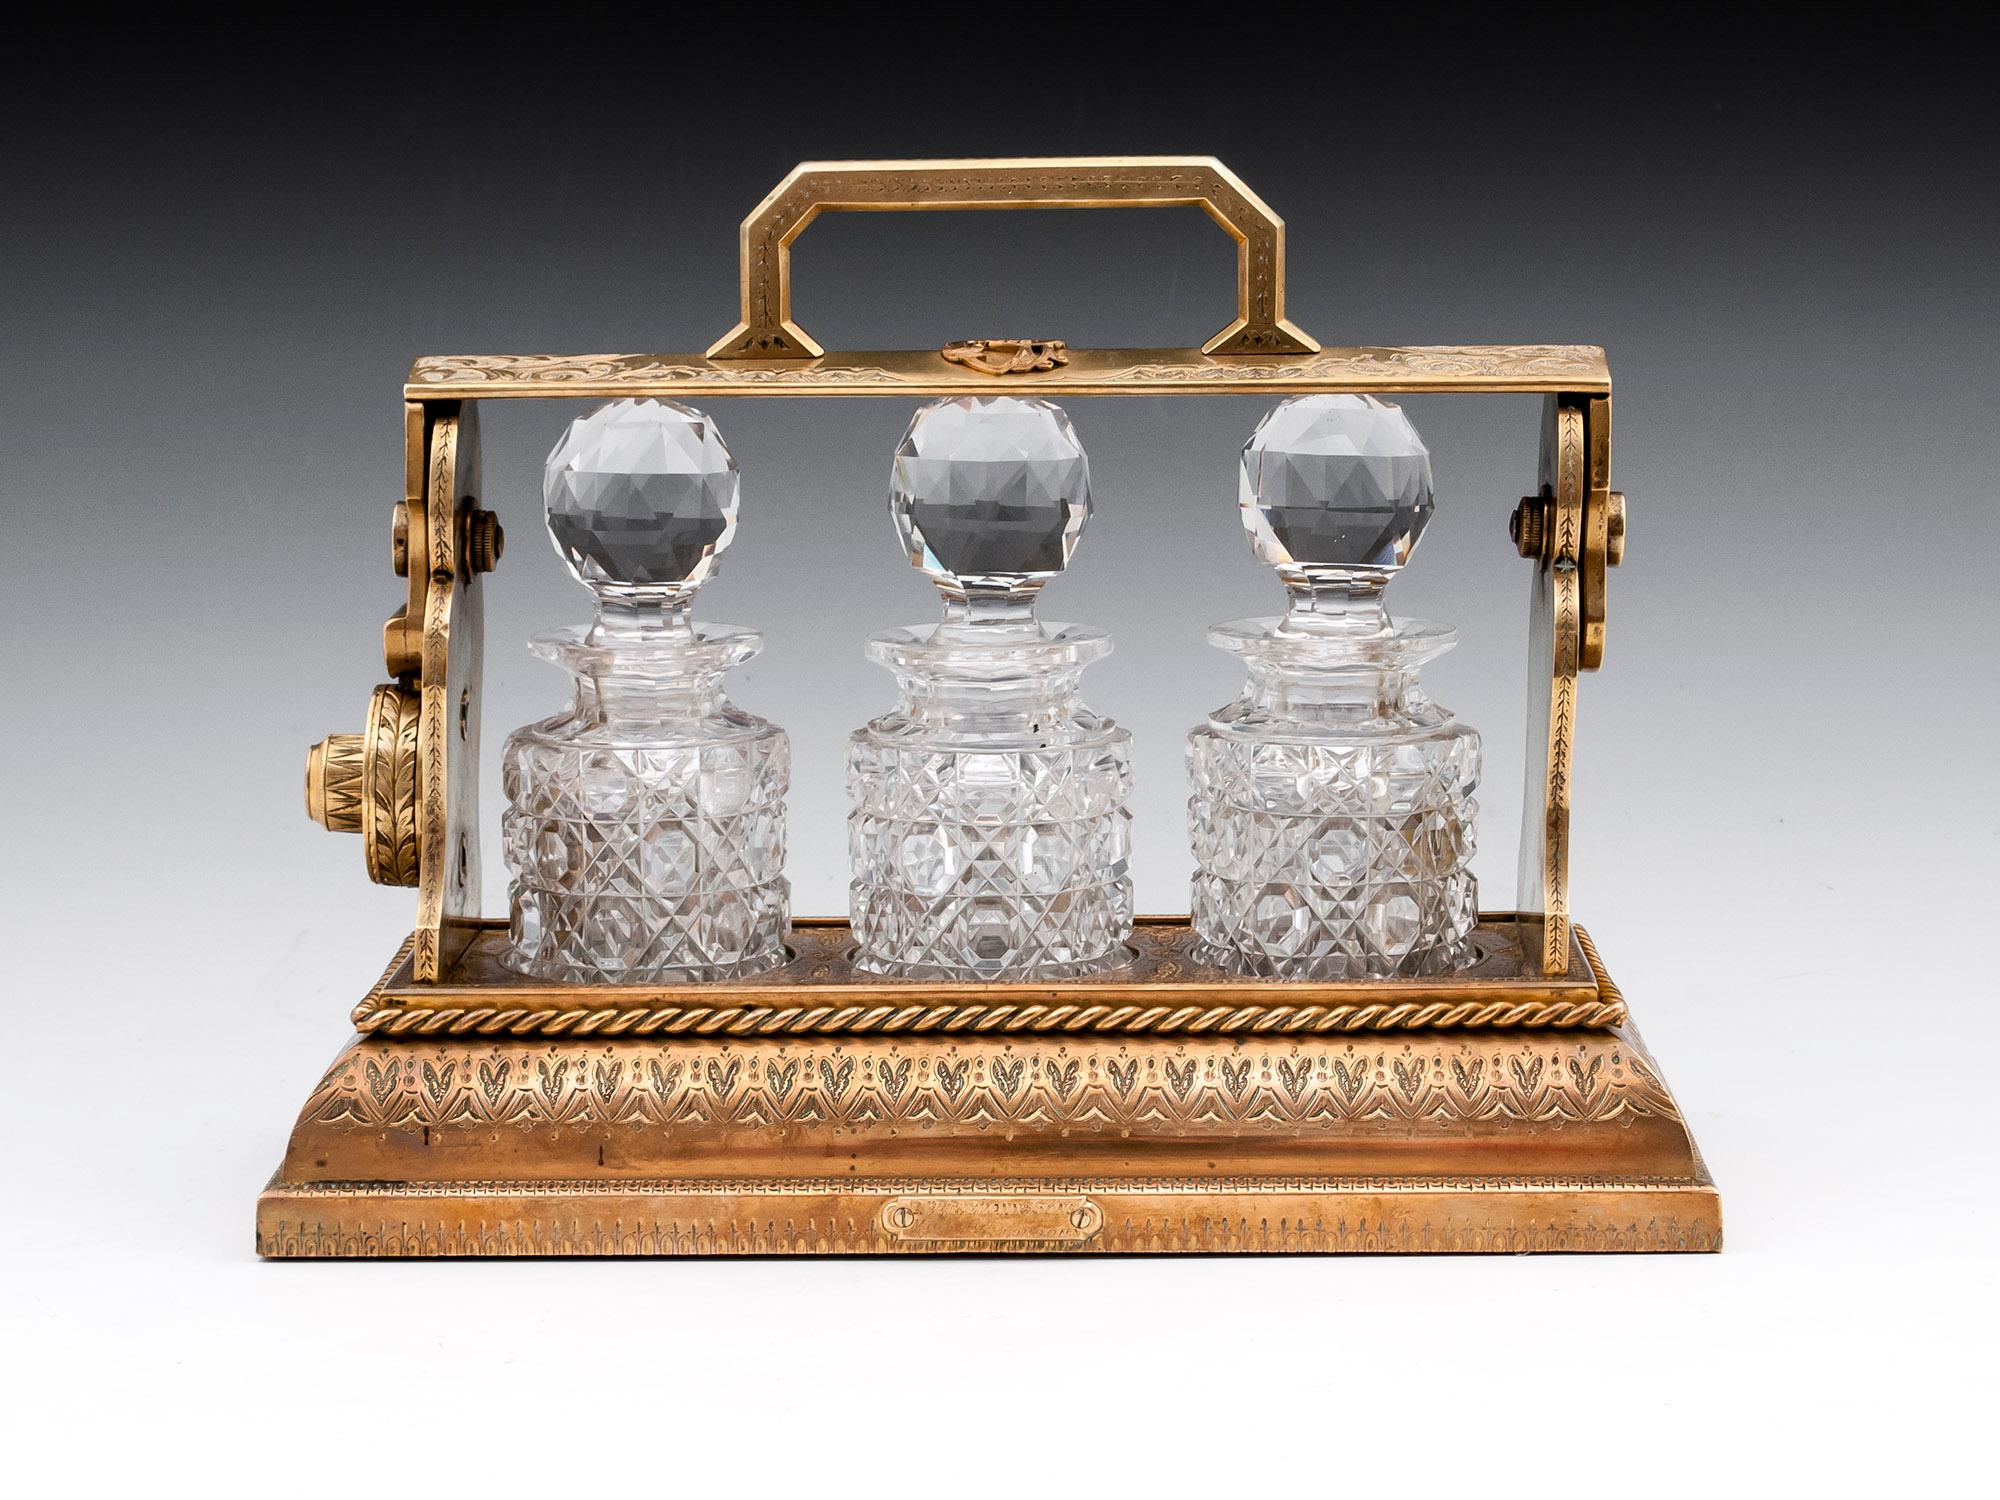 Bronze engraved and gilded miniature Tantalus by Betjemann. With three hobnail cut-glass bottles with faceted stoppers. The handle has a raised monogram 